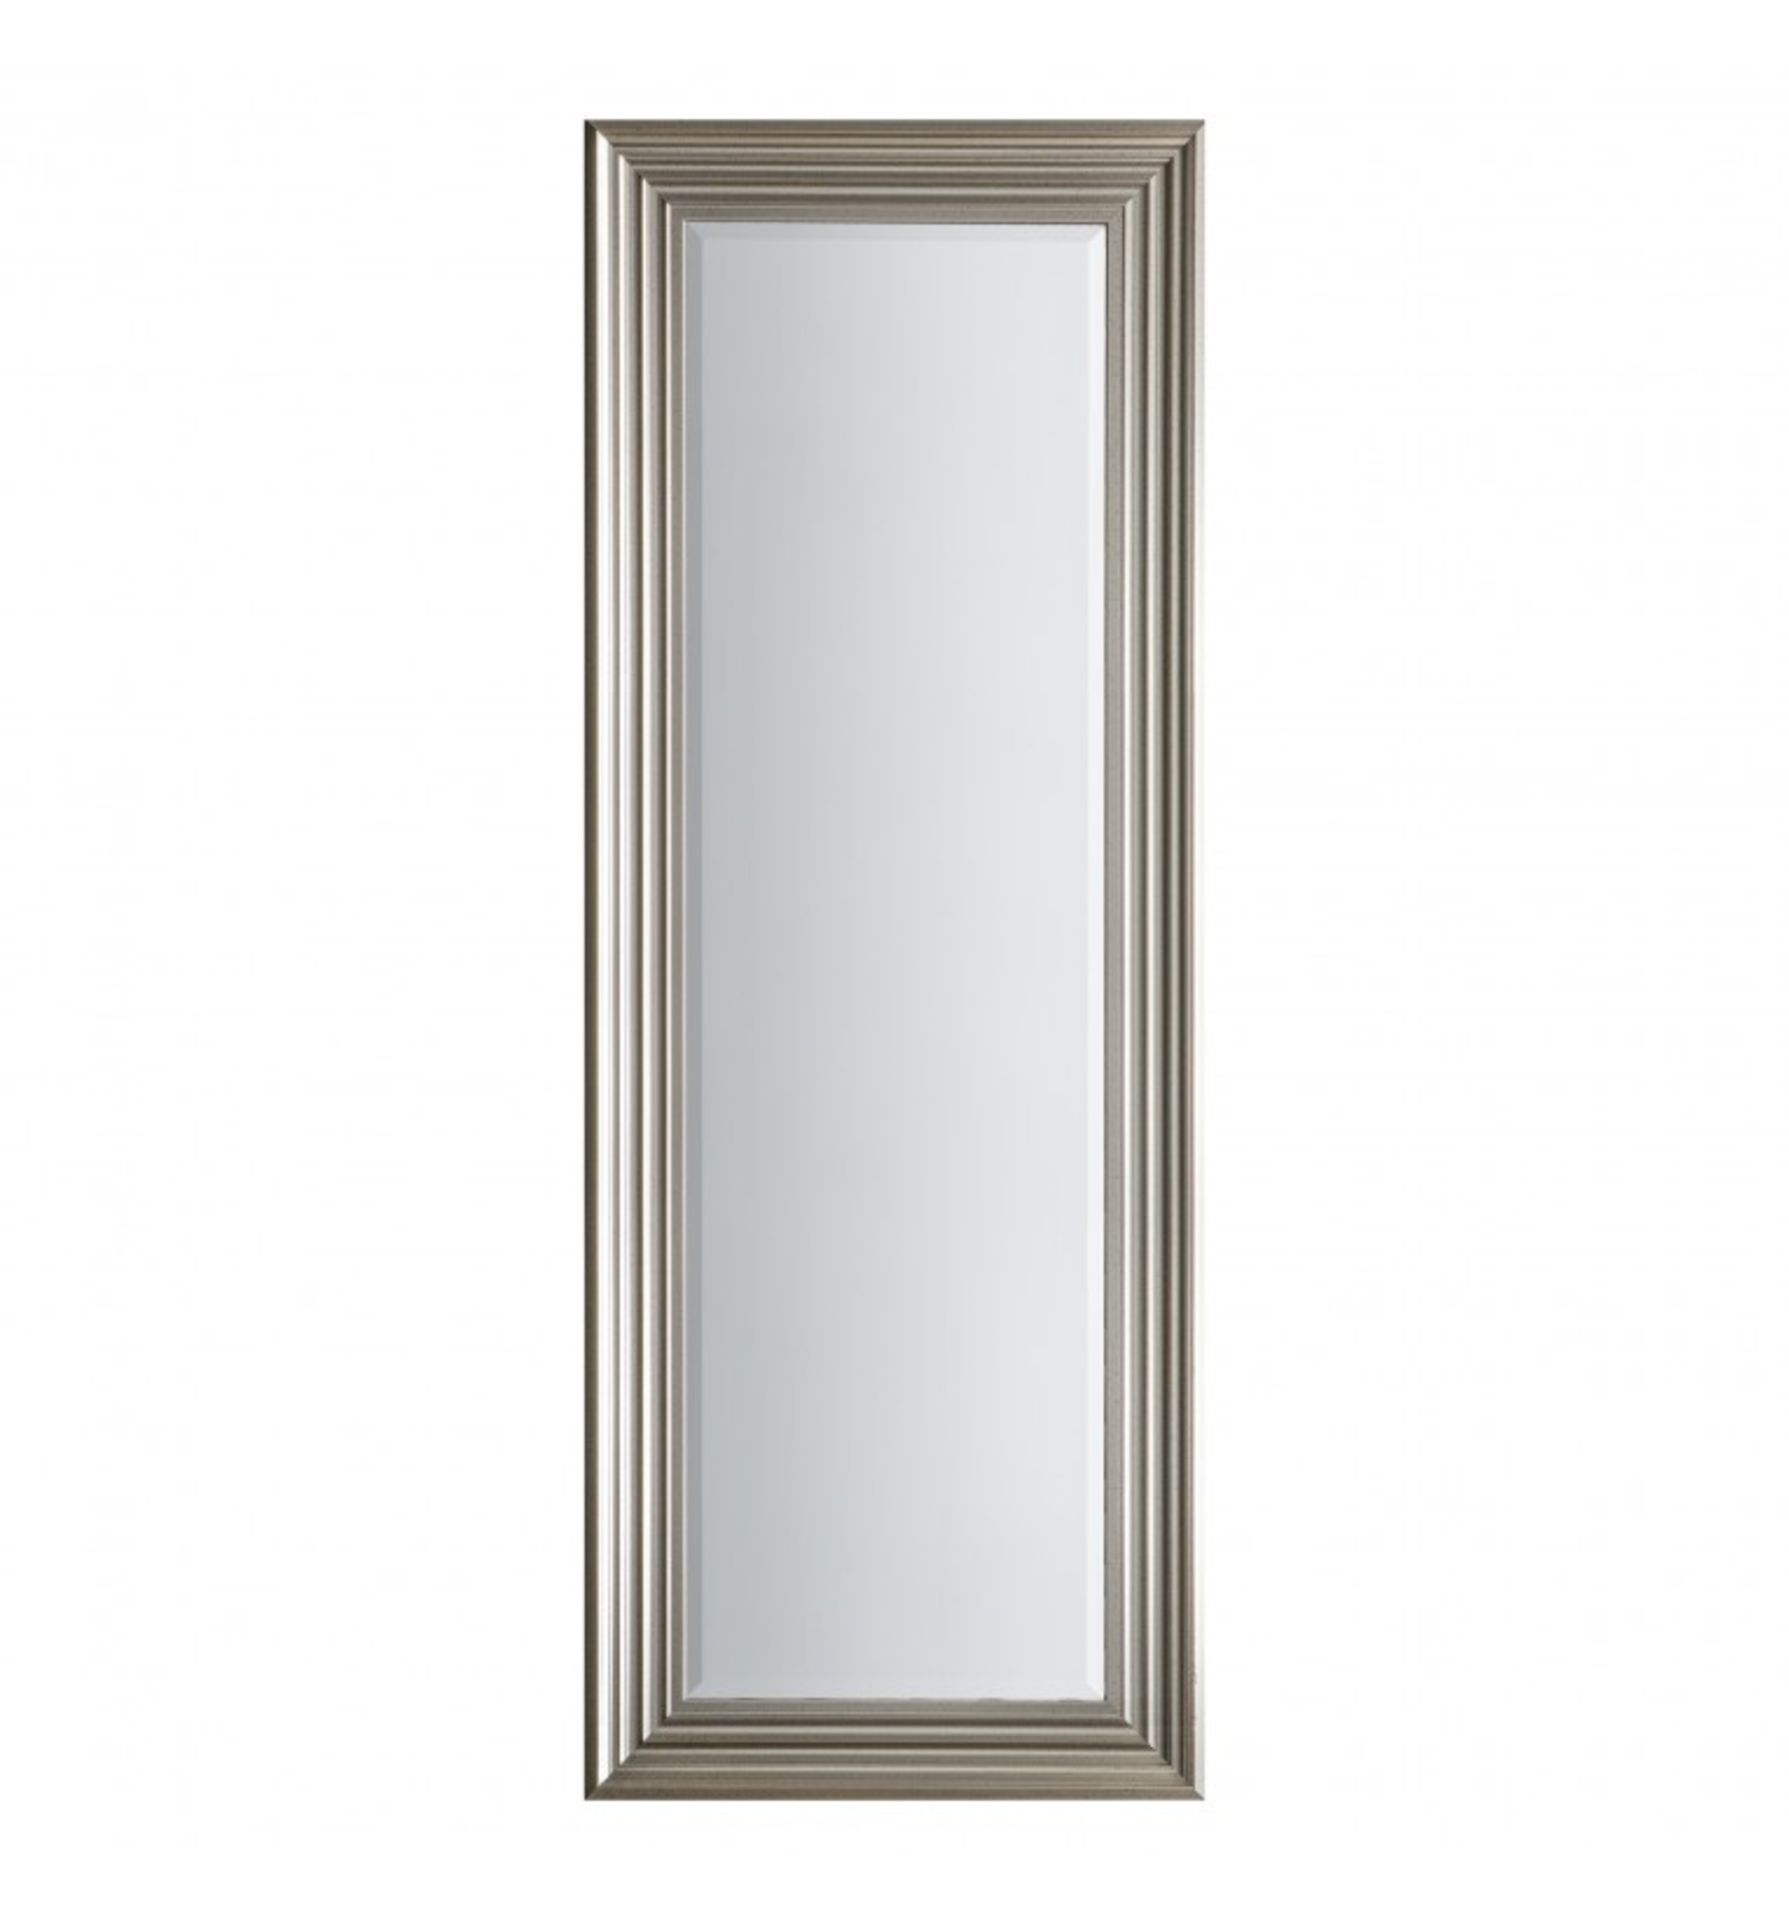 Haylen Mirror Brushed Steel Leaner The Haylen Mirror Is The Perfect Addition To Any Home. Finished